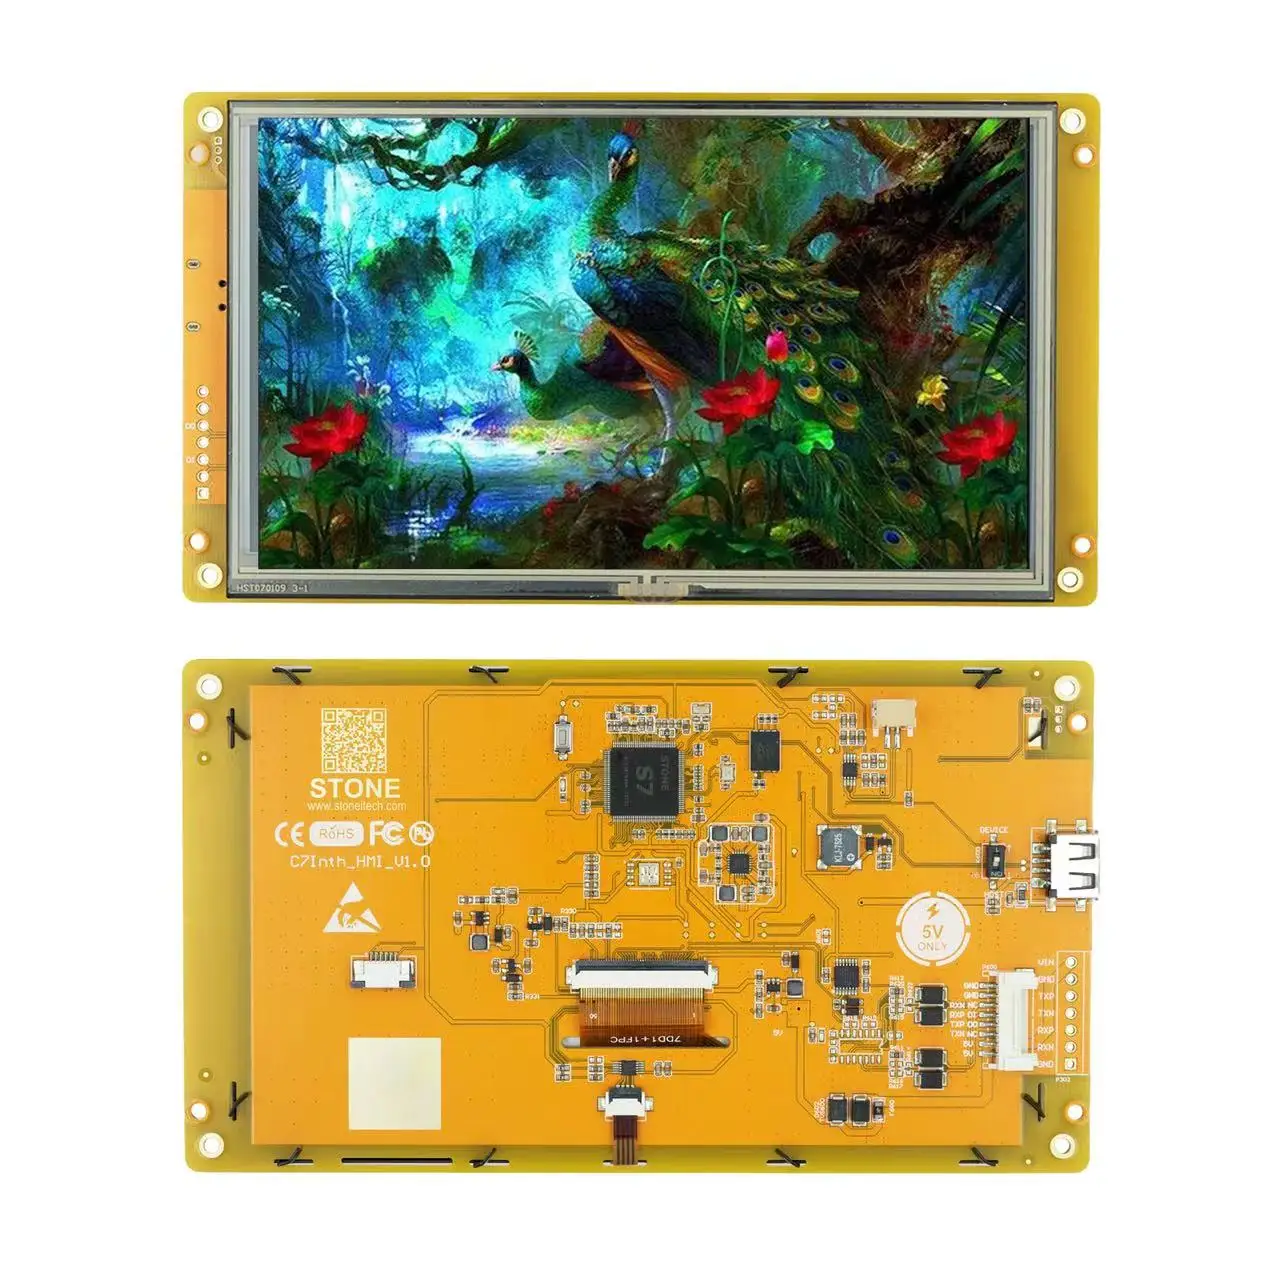 7.0 INCH STONE Graphical User Interface TFT LCD Panel with RS232 OR RS485 OR TTL High Resolution of 1024*600 for Industrial Use